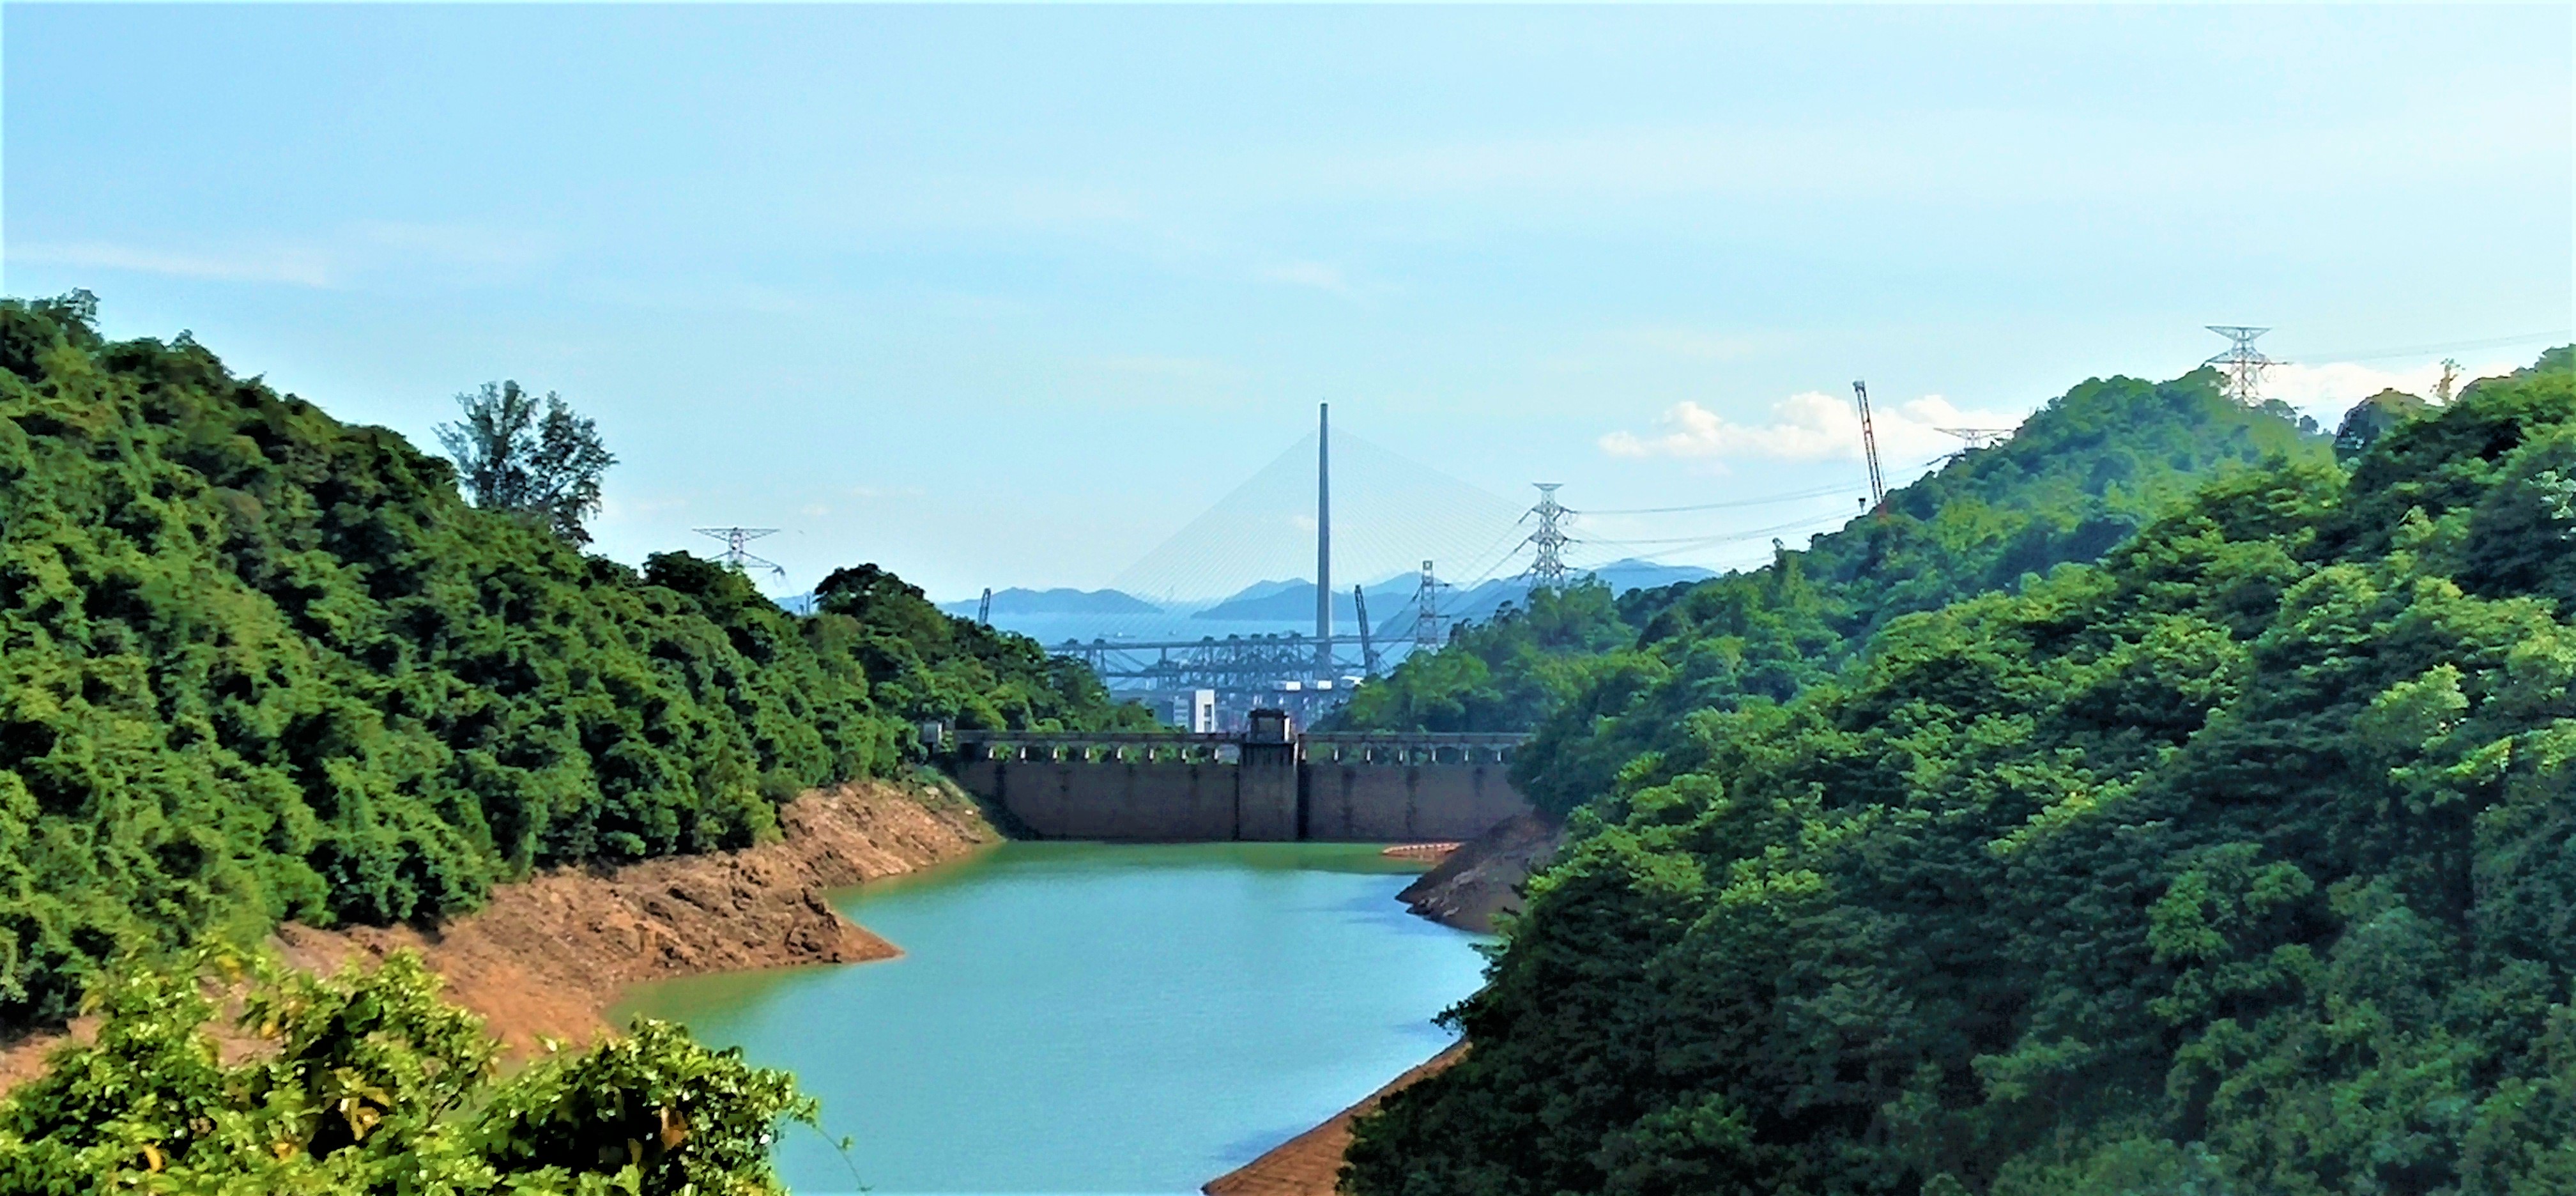 See the long Stonecutter Bridge and busy container terminal from the dam of Kowloon Reservoir